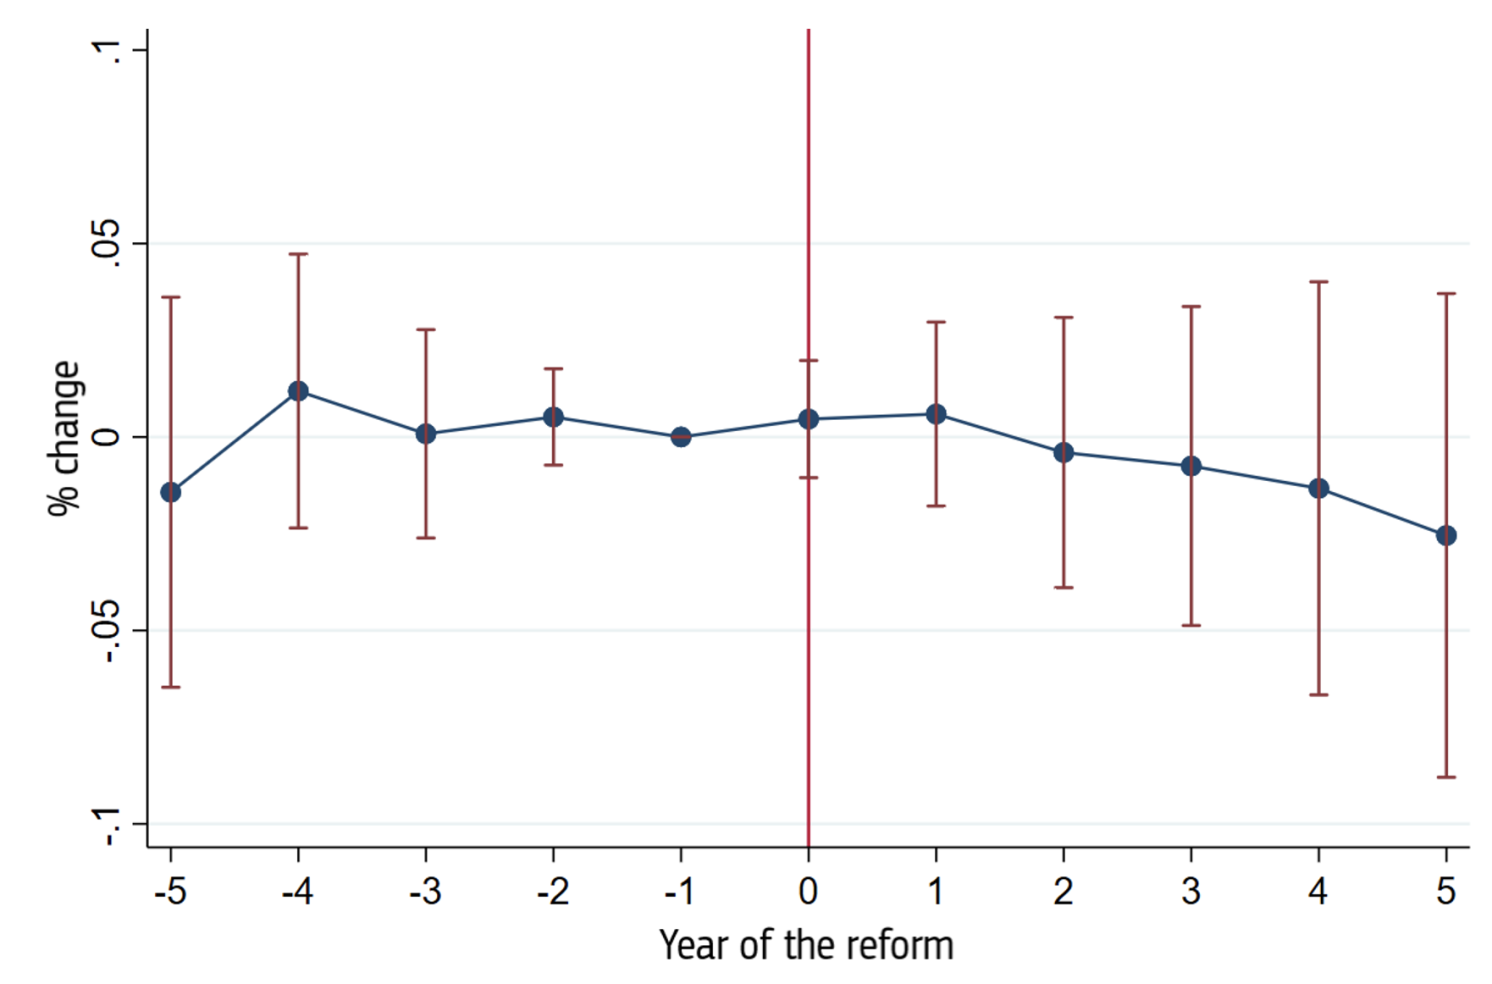 Figure 2 The effect of reductions in working time on employment